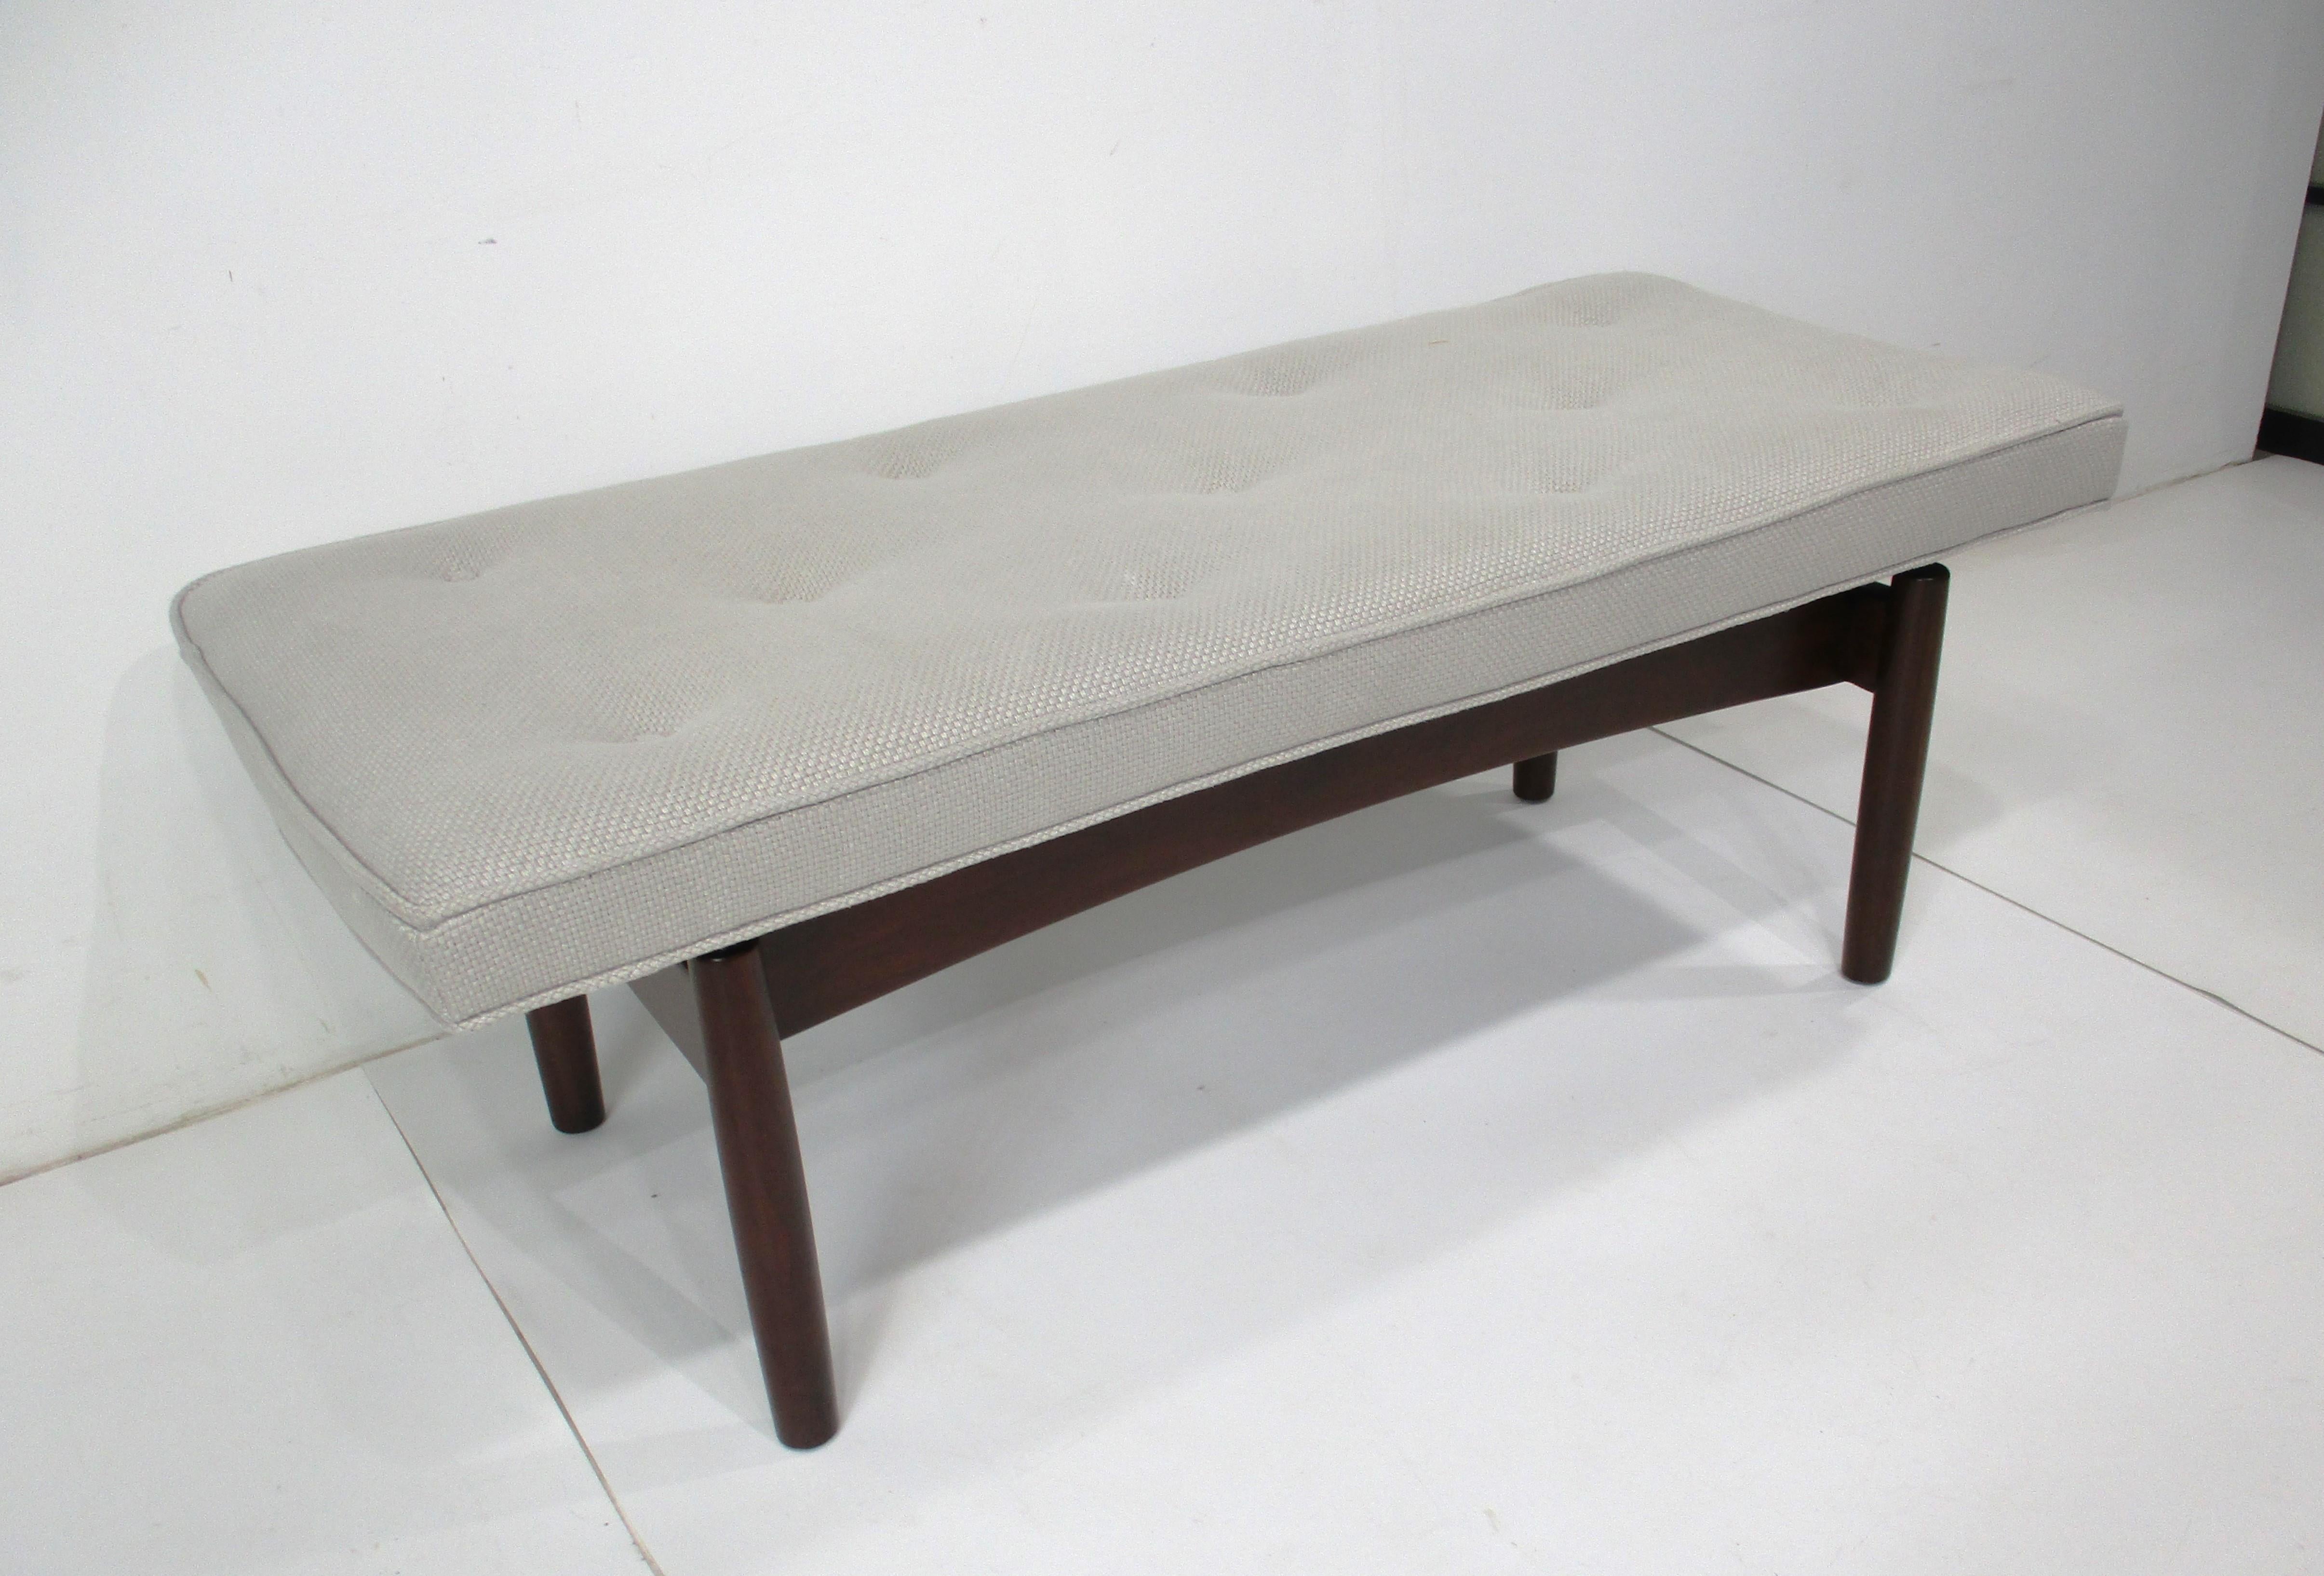 Upholstered Walnut Bench in the Style of Greta Grossman Danish Modern (A) For Sale 2